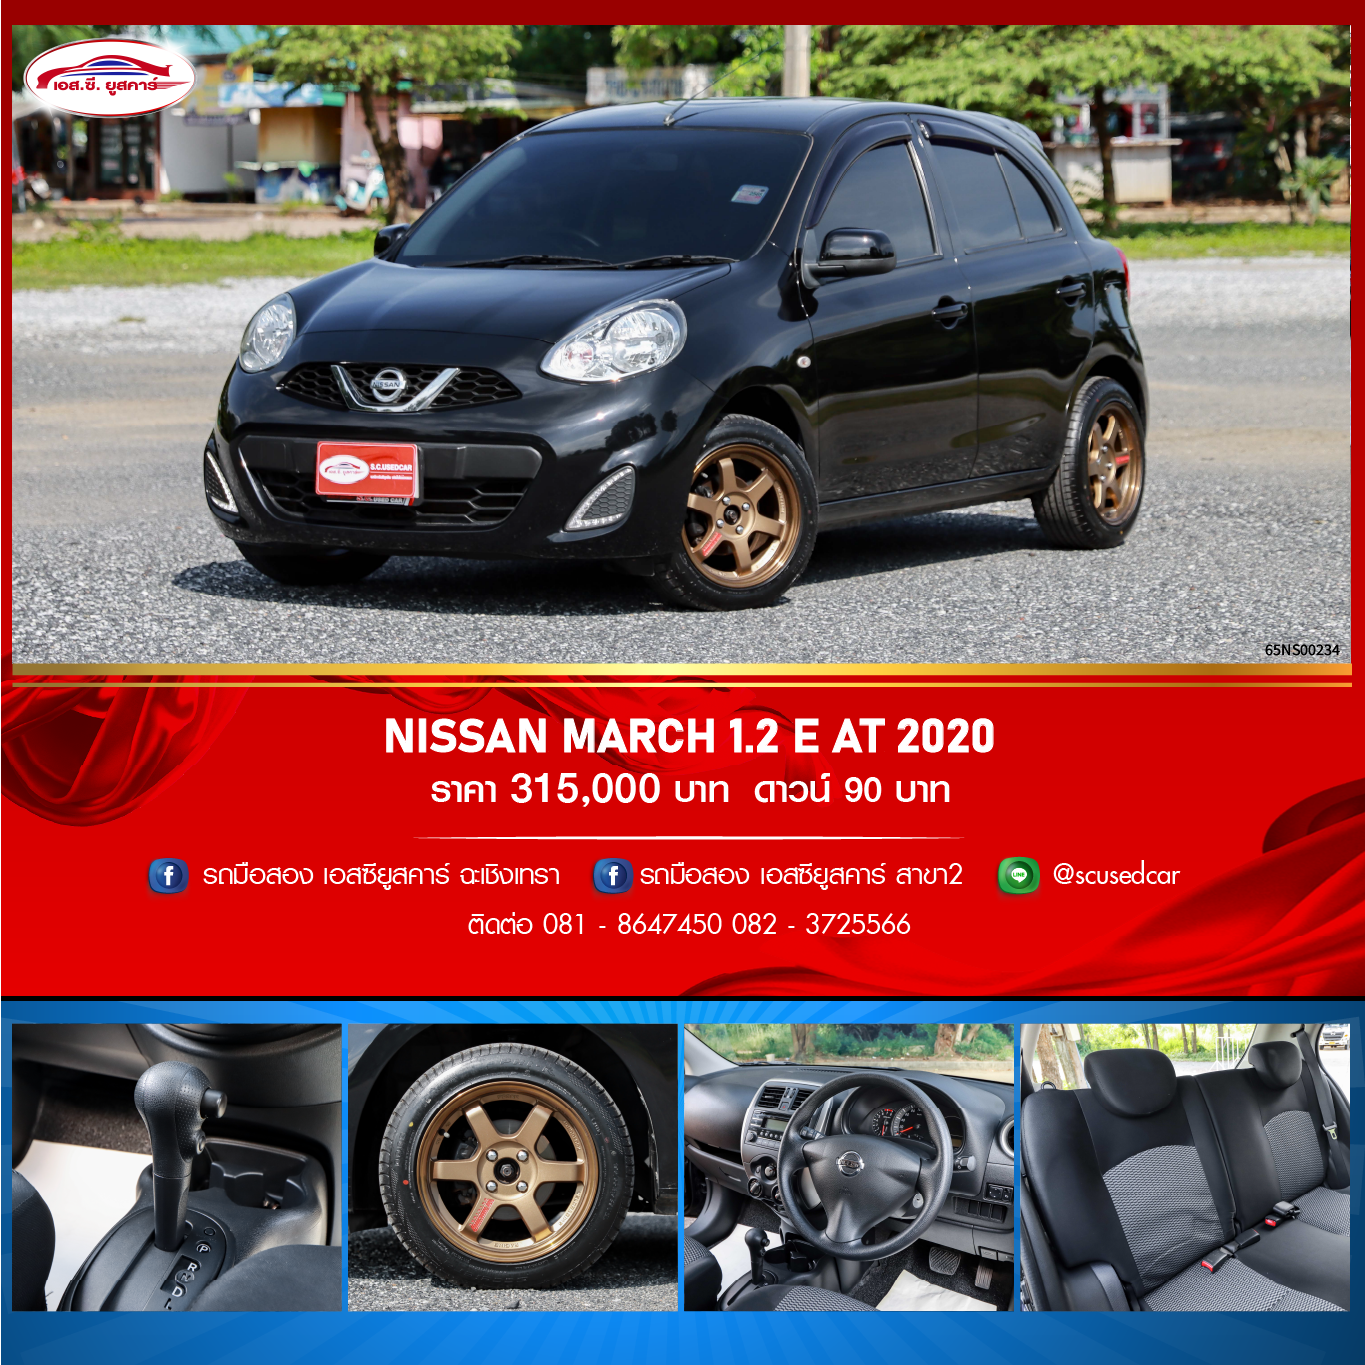 NISSAN MARCH 1.2 E AT 2020